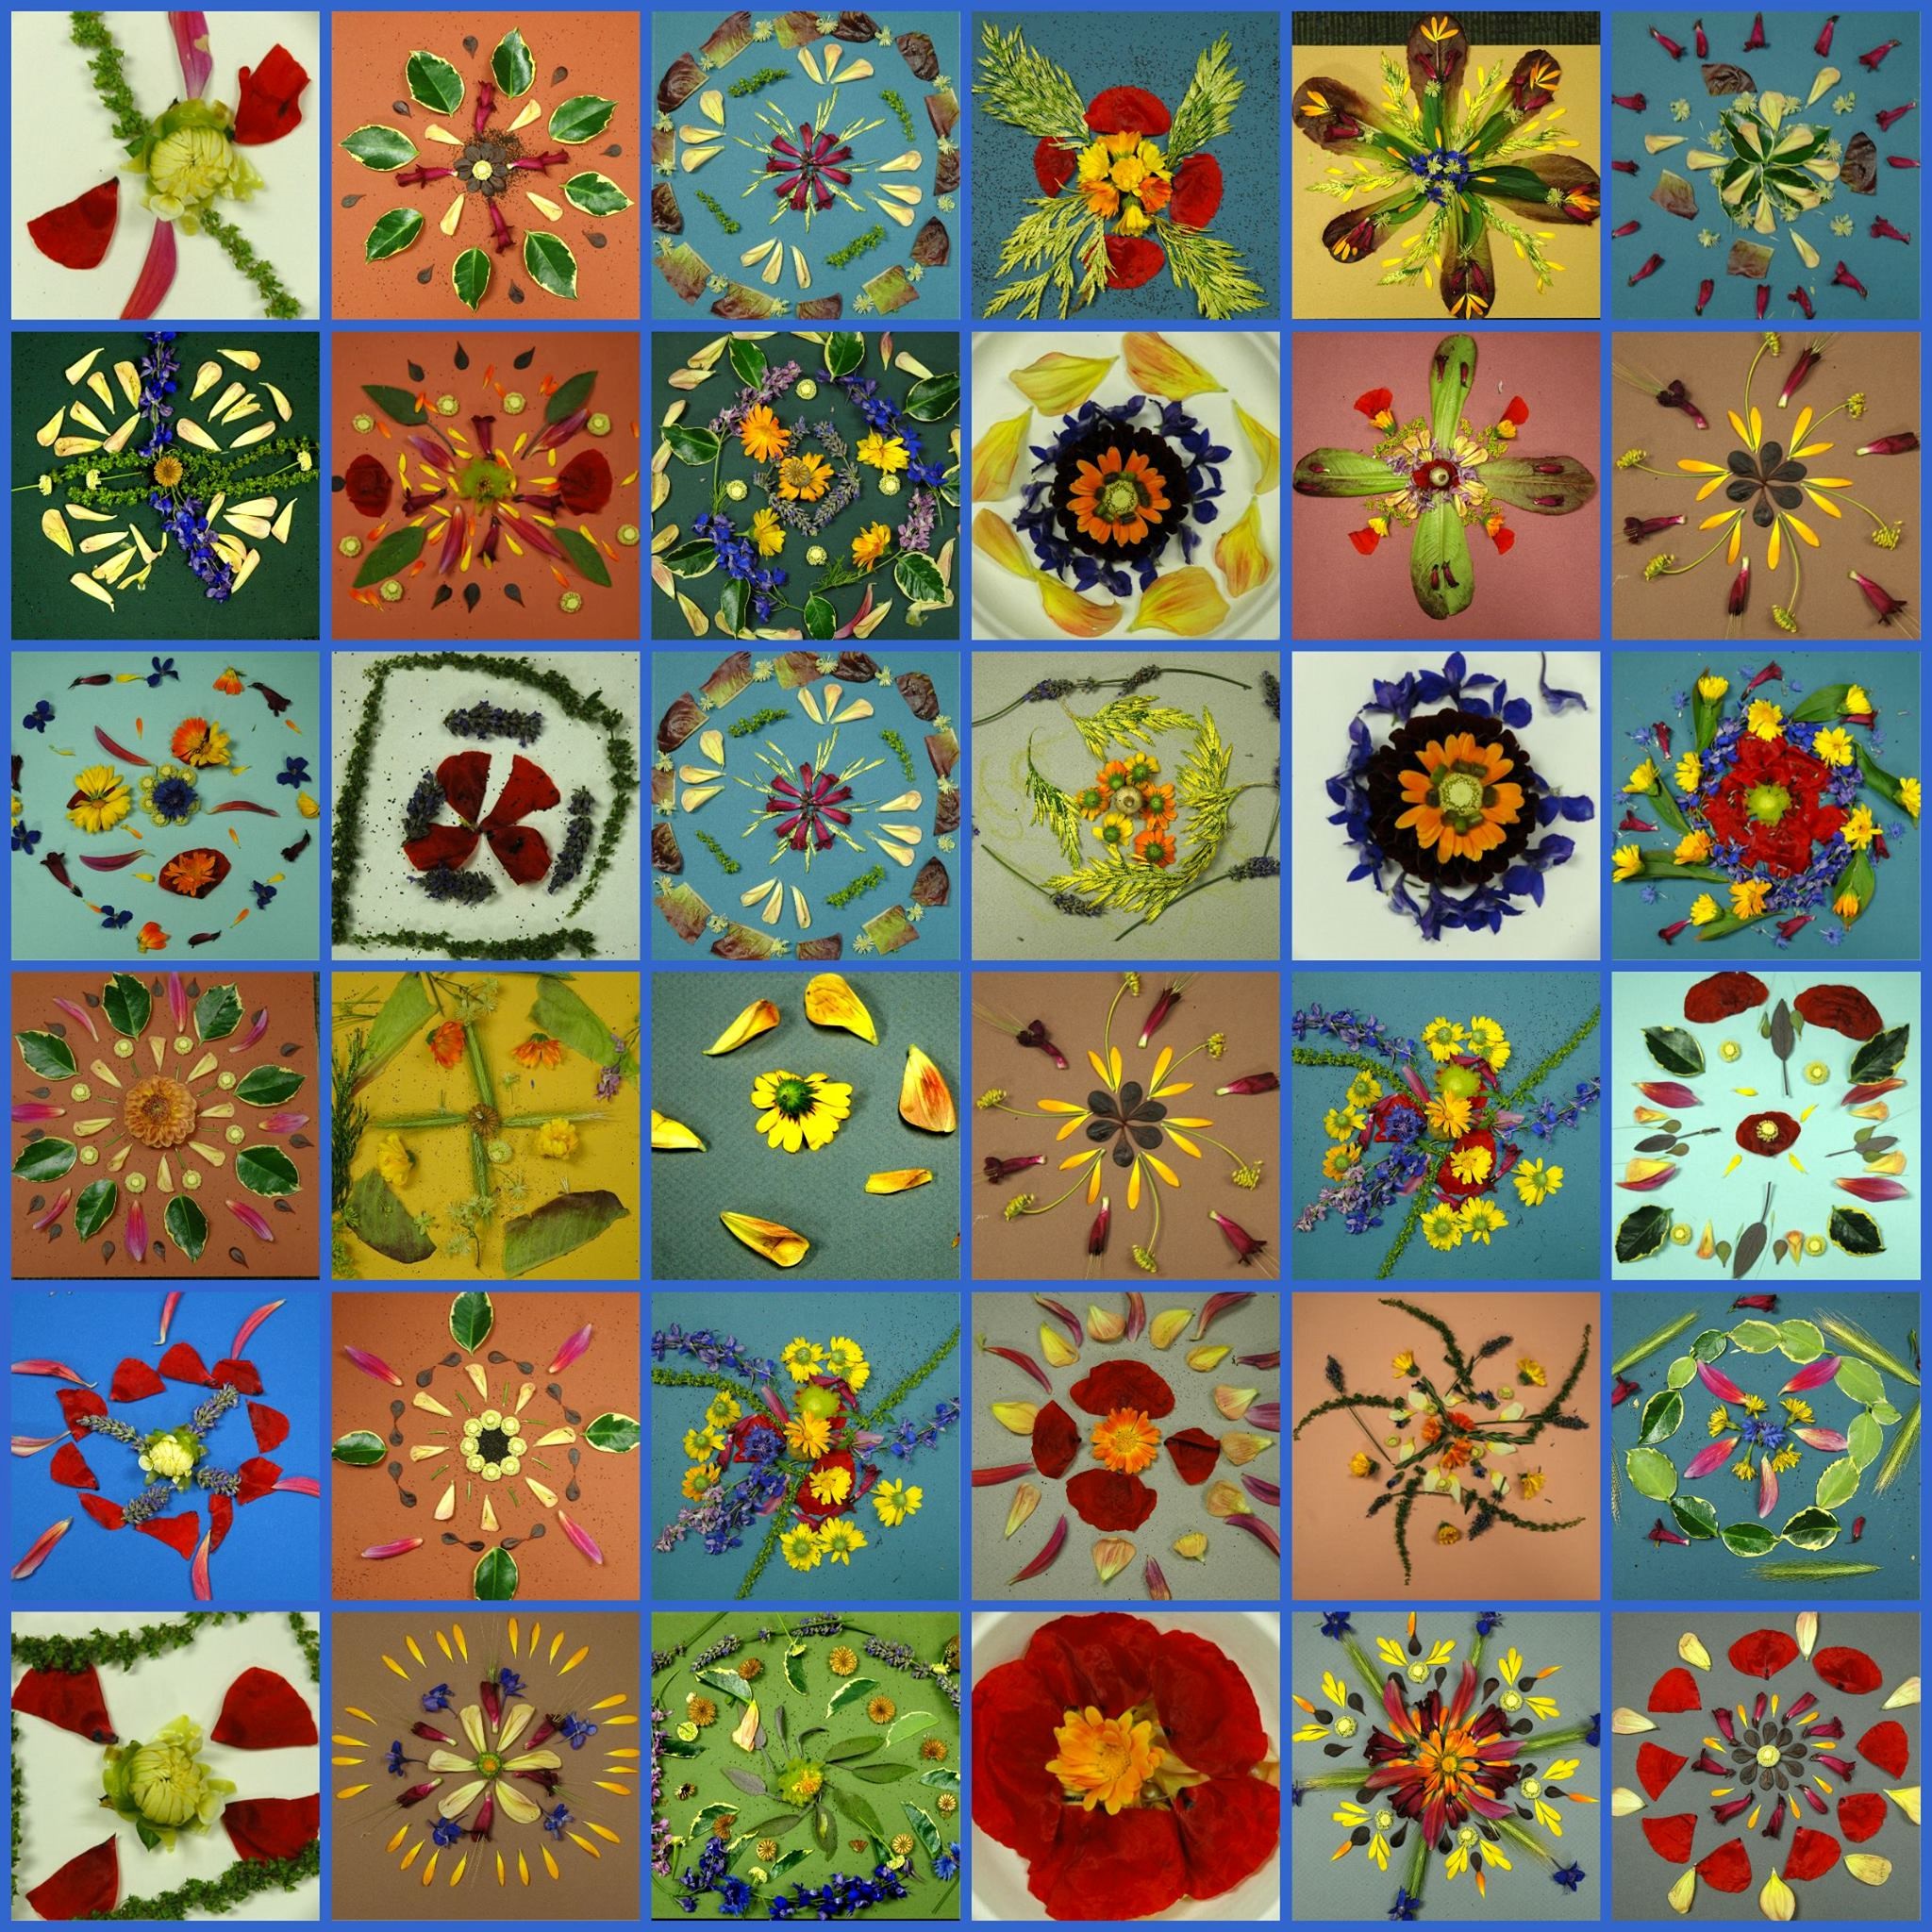 Images of many types of flower petals shaped into various patterns